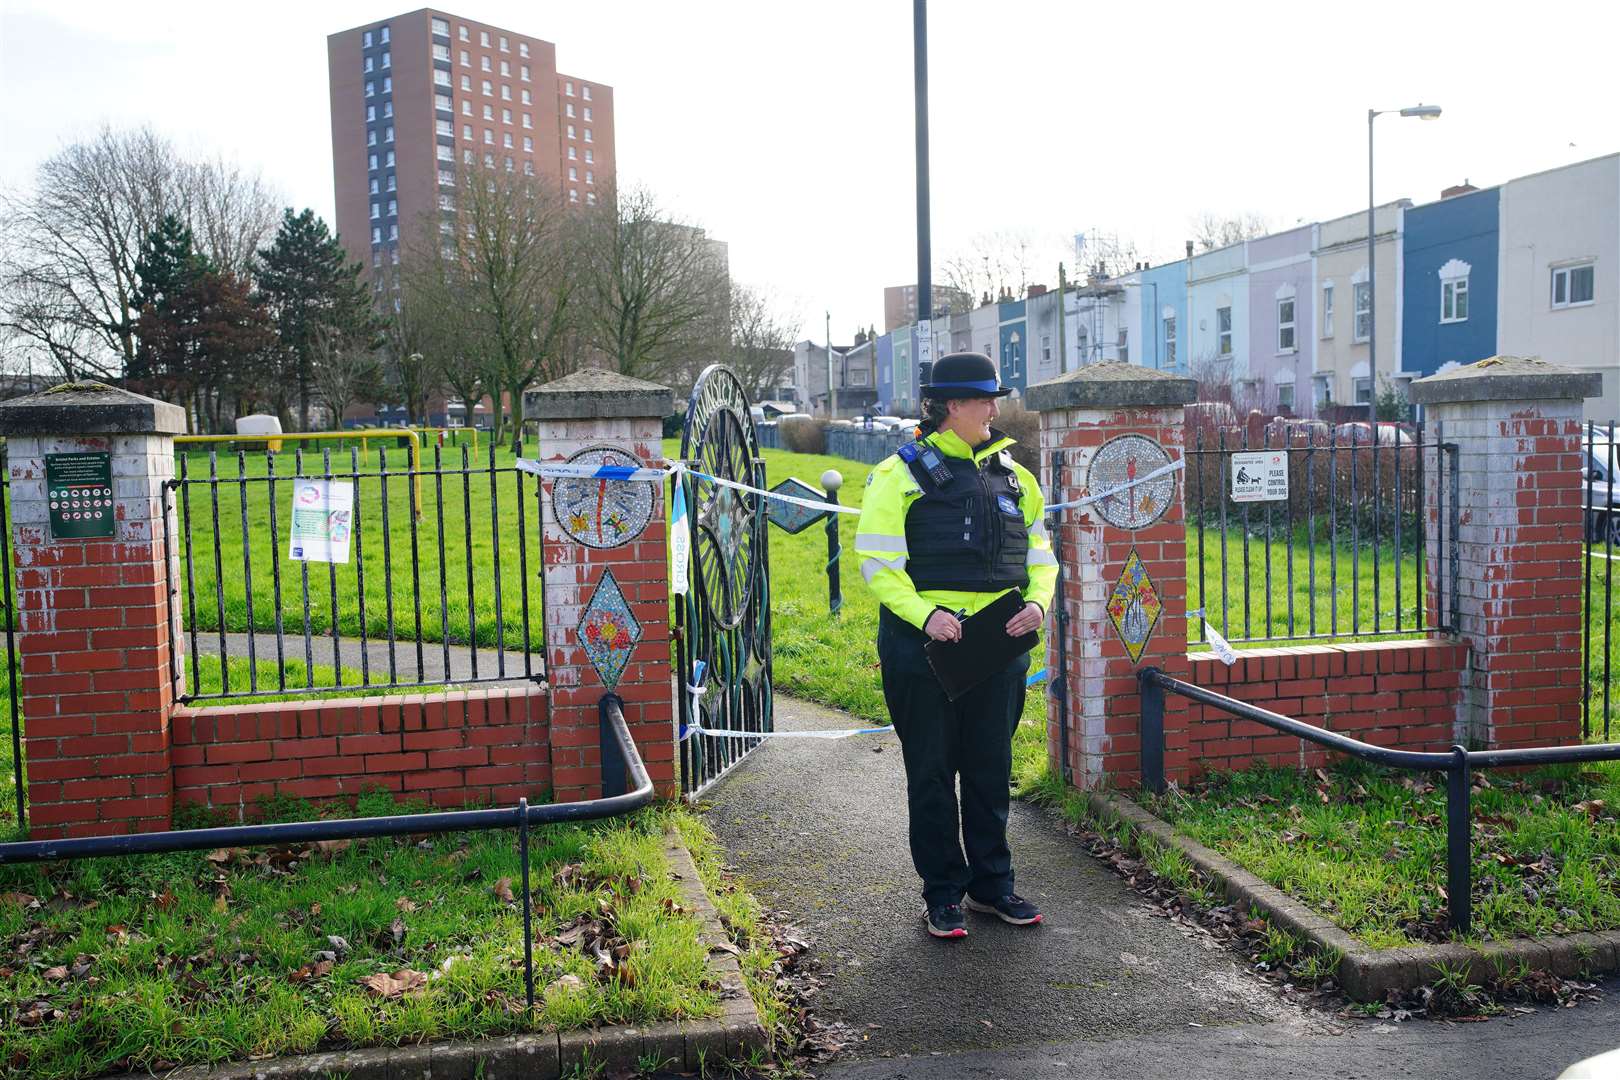 The teenager was attacked in Rawnsley Park play area in the St Phillips area of the city (Ben Birchall/PA)